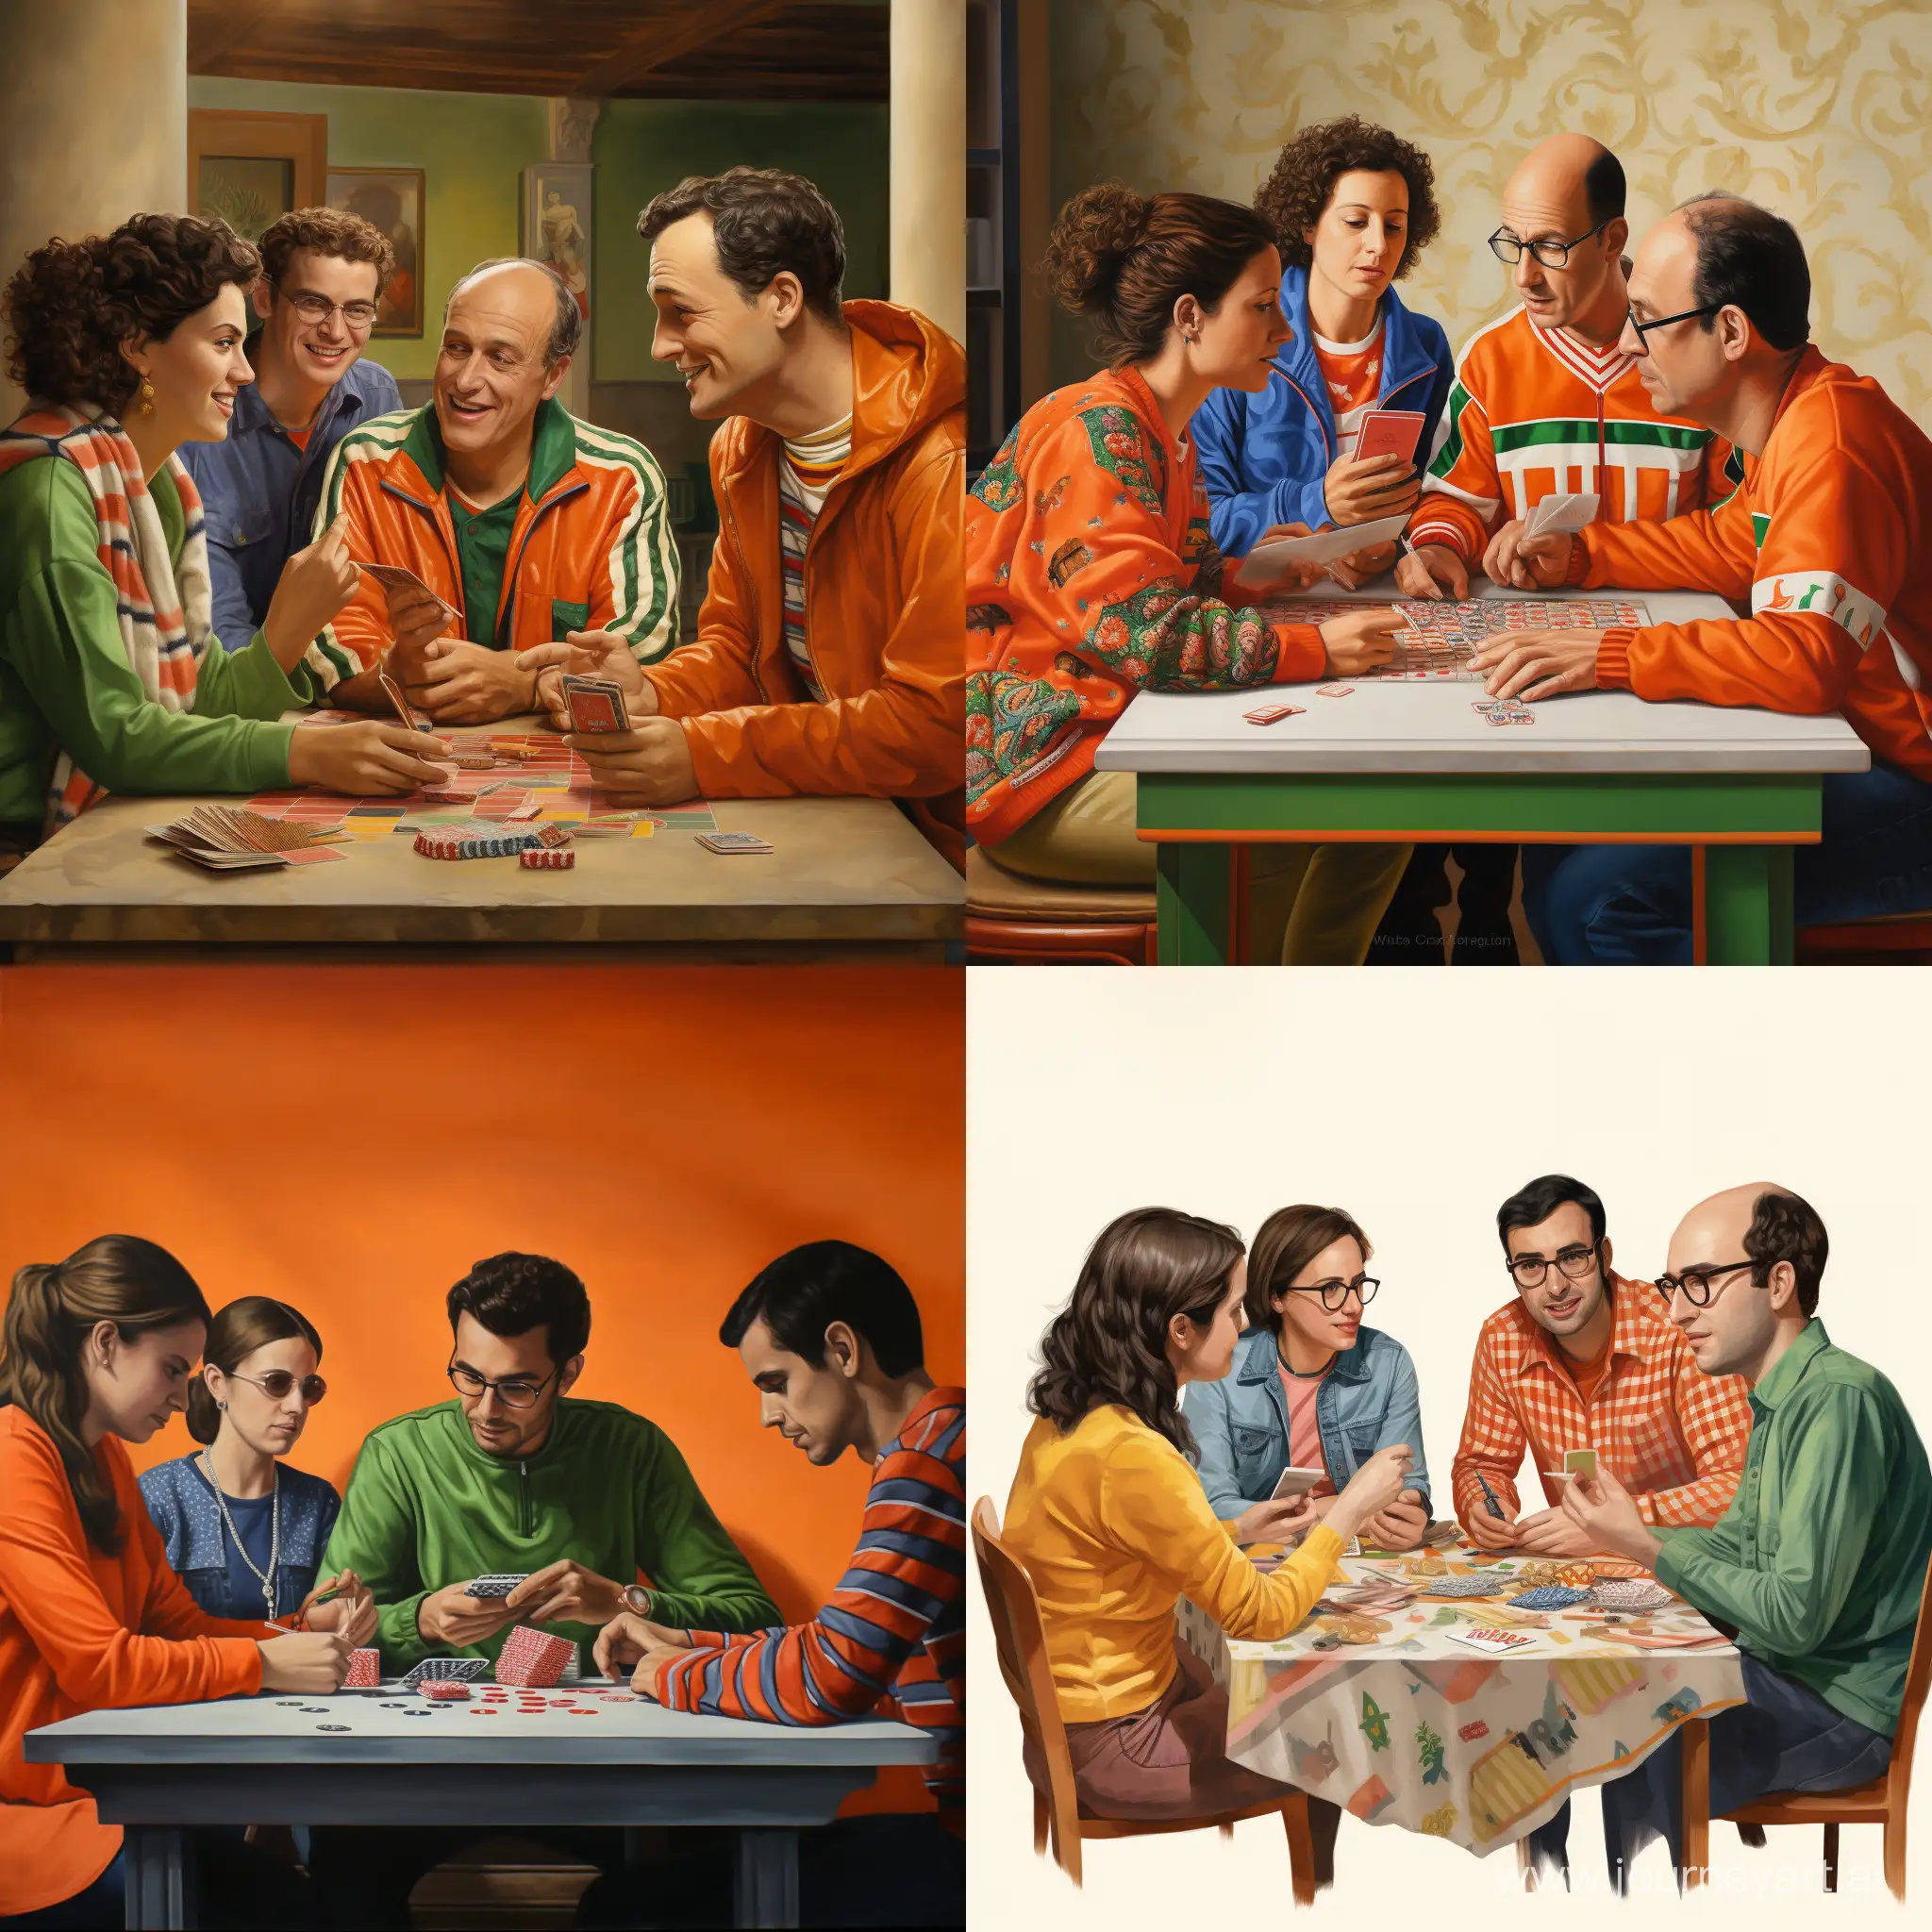 Colorful-Card-Game-Gathering-with-Distinct-Attires-in-Sicilian-Scopa-Match